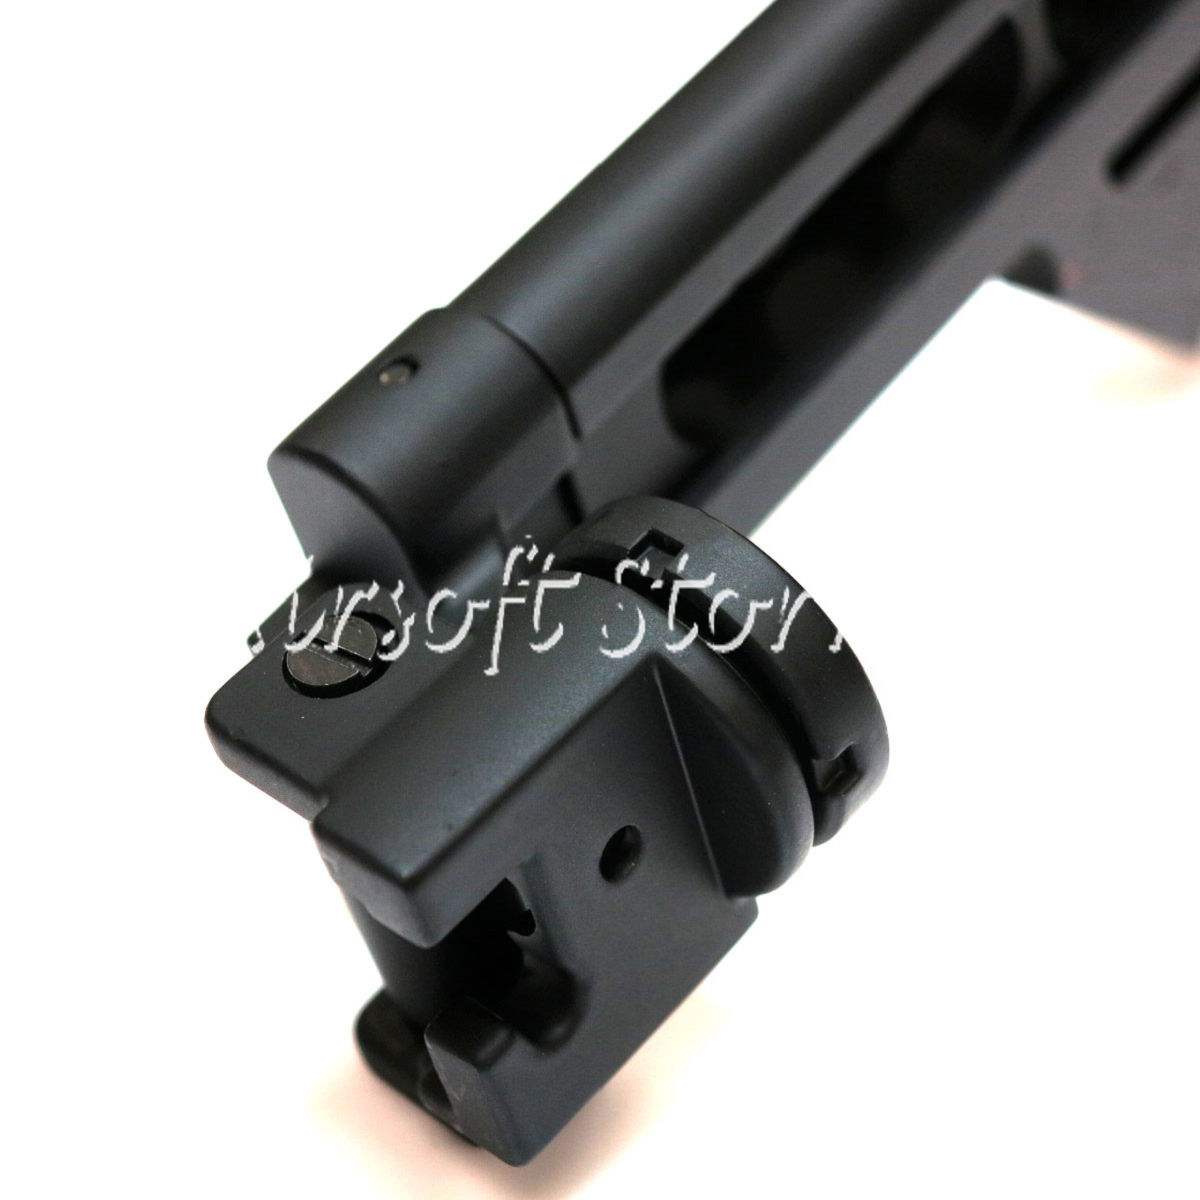 Airsoft Tactical Gear D-Boys LR-300 Metal Extendable Folding Stock for M4/M16 Black - Click Image to Close